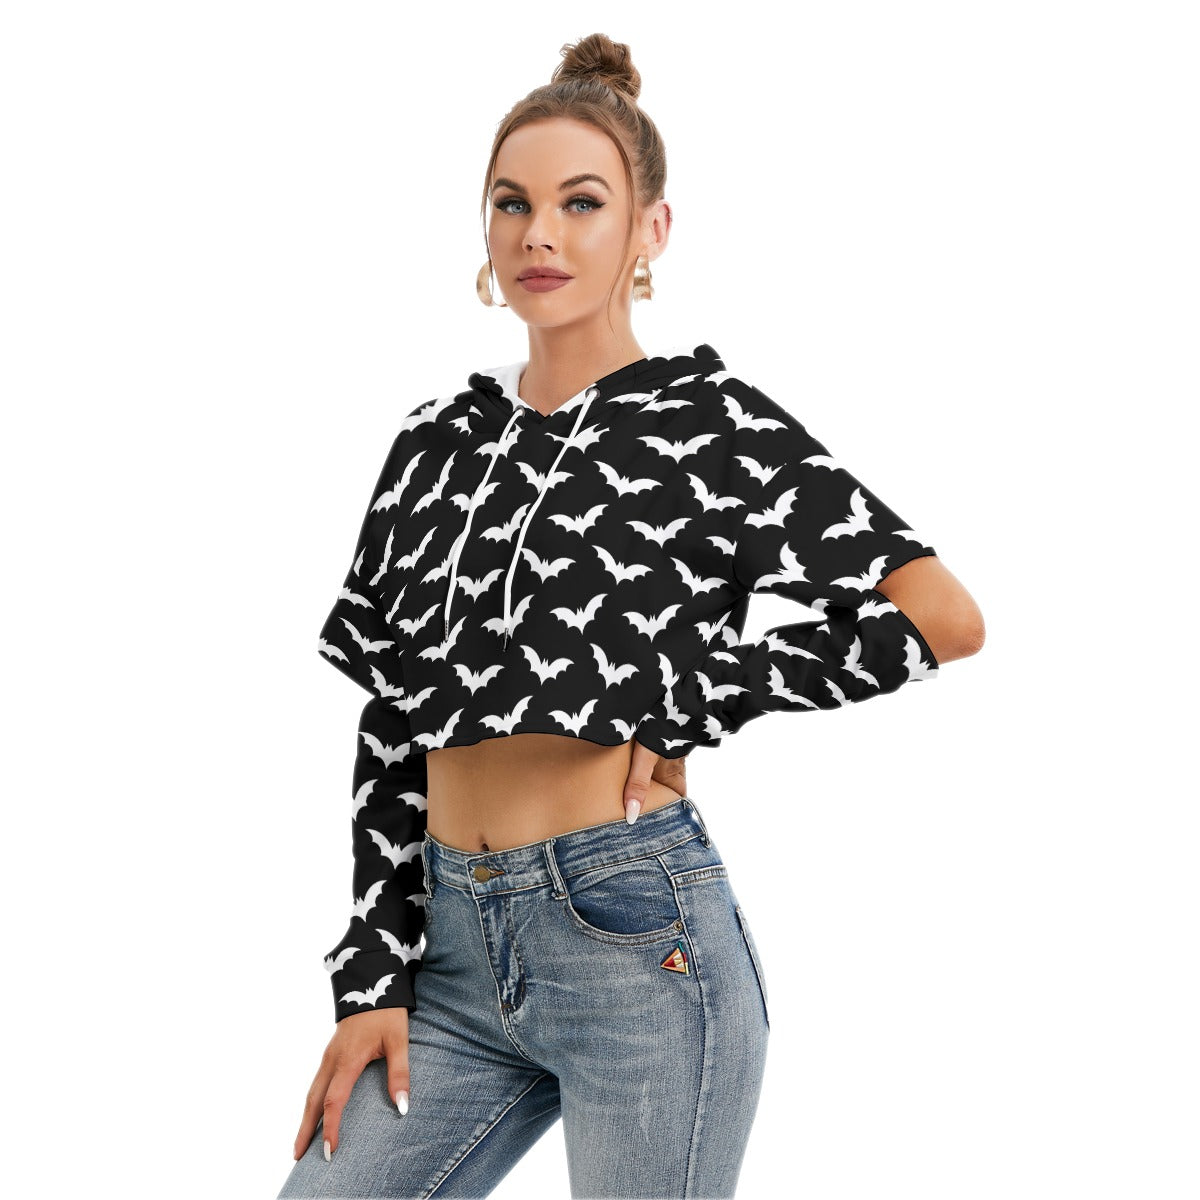 Bat Crop Hoodie With Hollow Out Sleeve